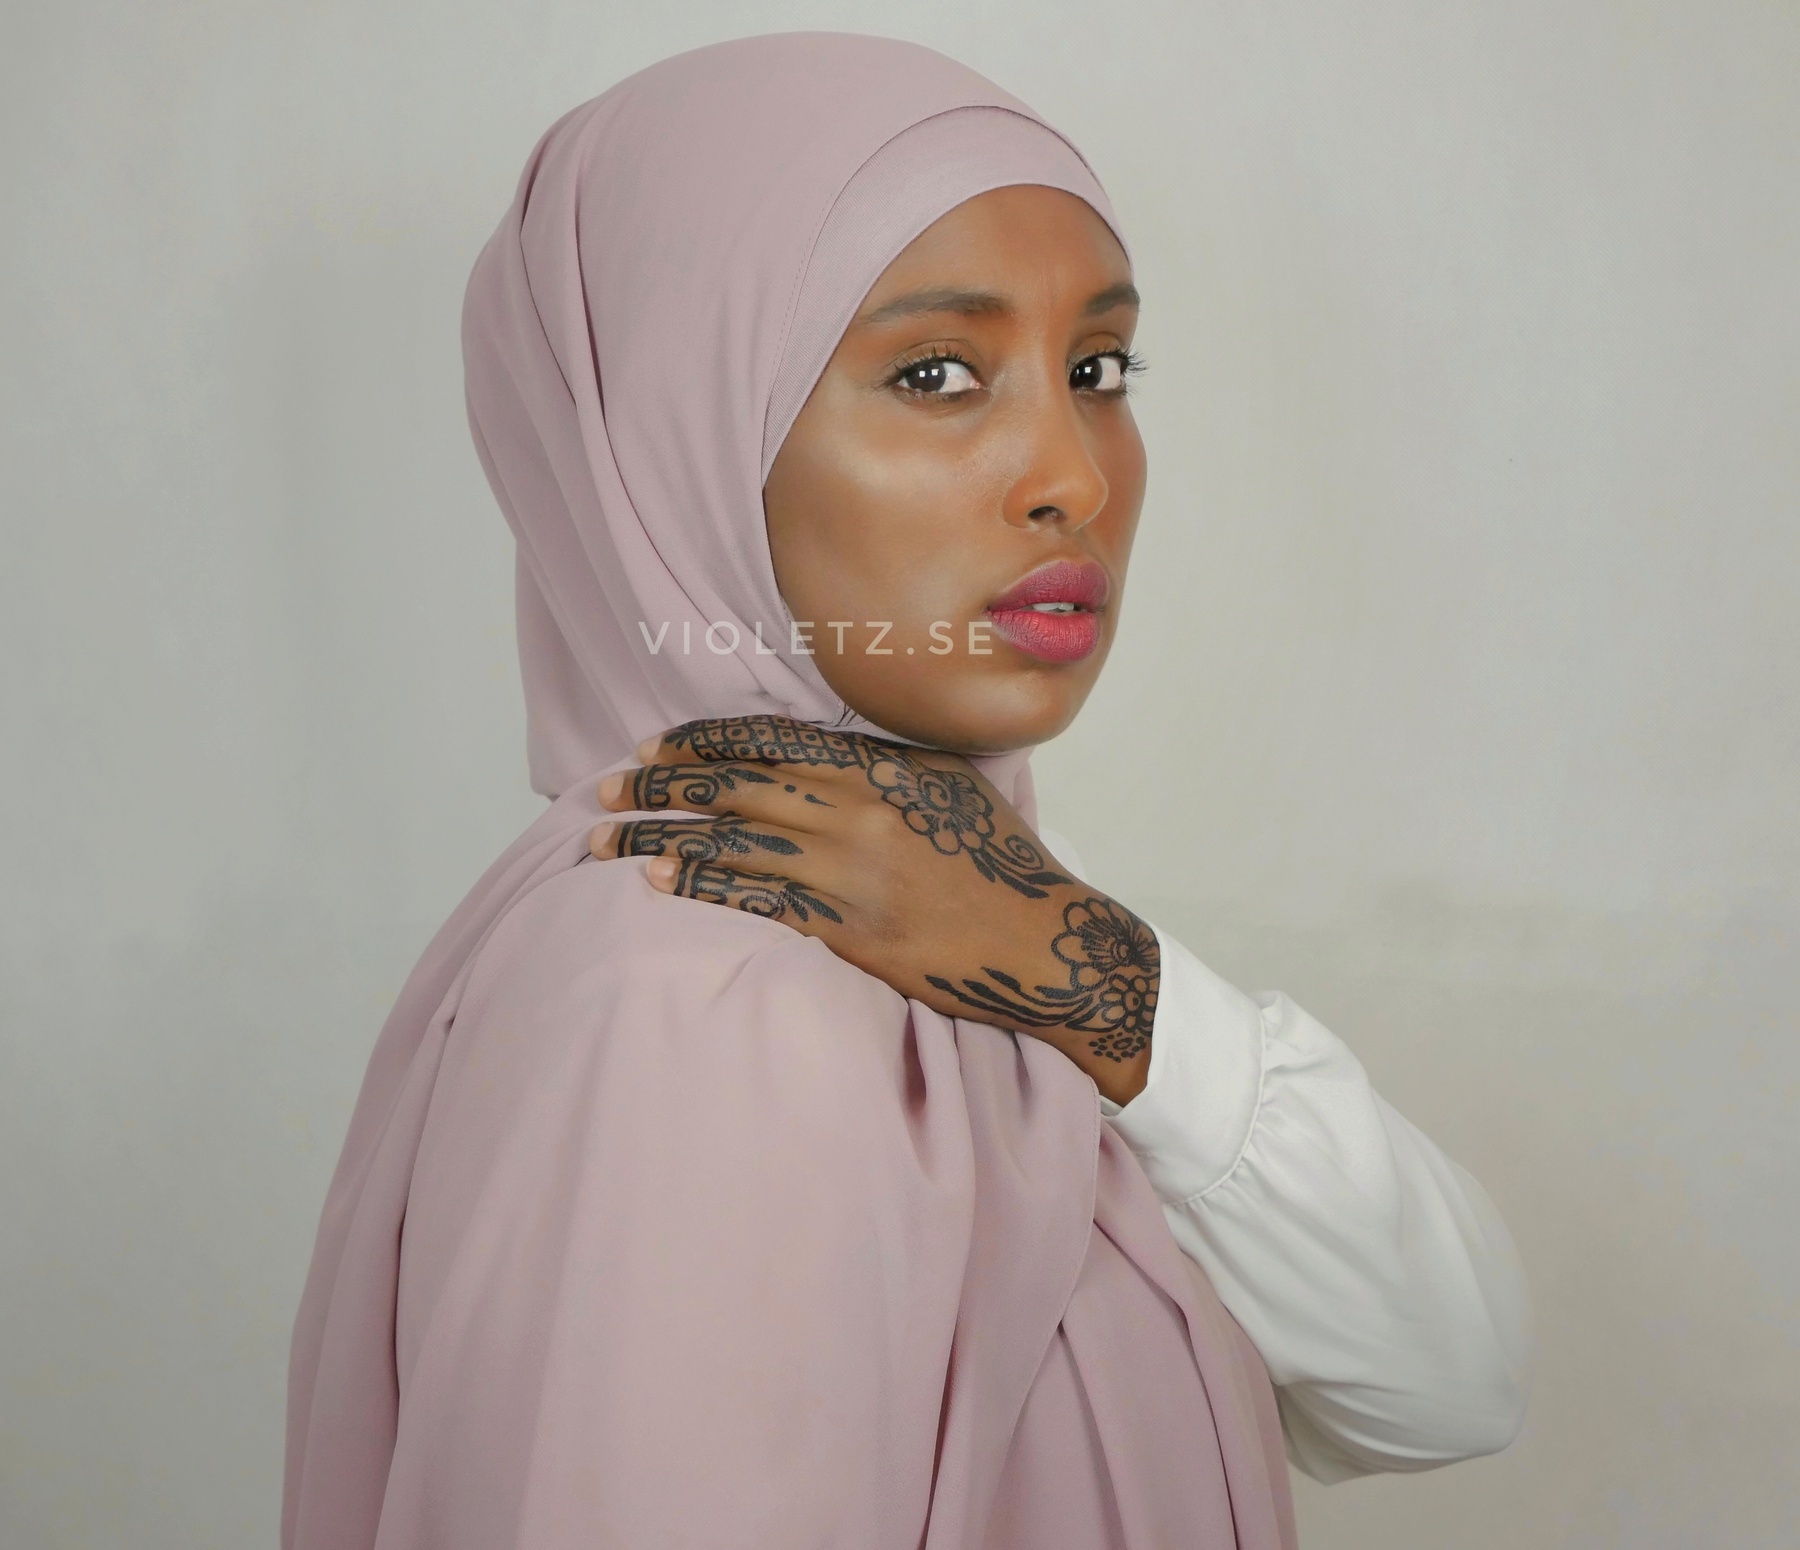 Instant Chiffong hijab med undersjal - camio